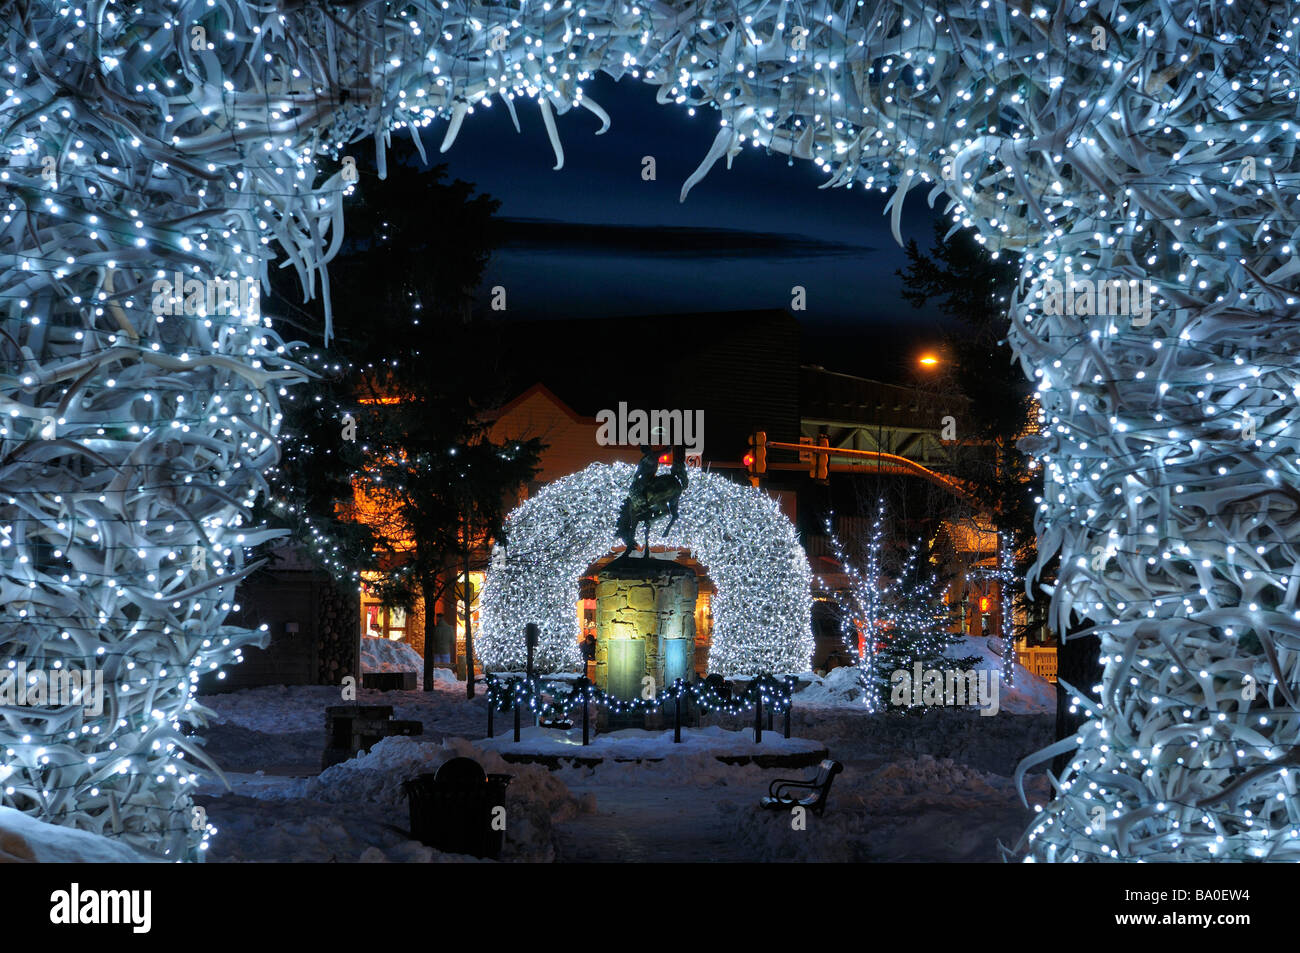 Bright Christmas lights on Elk antler arches in Jackson Wyoming USA town square in winter at twilight with cowboy on bucking broncho statue Stock Photo